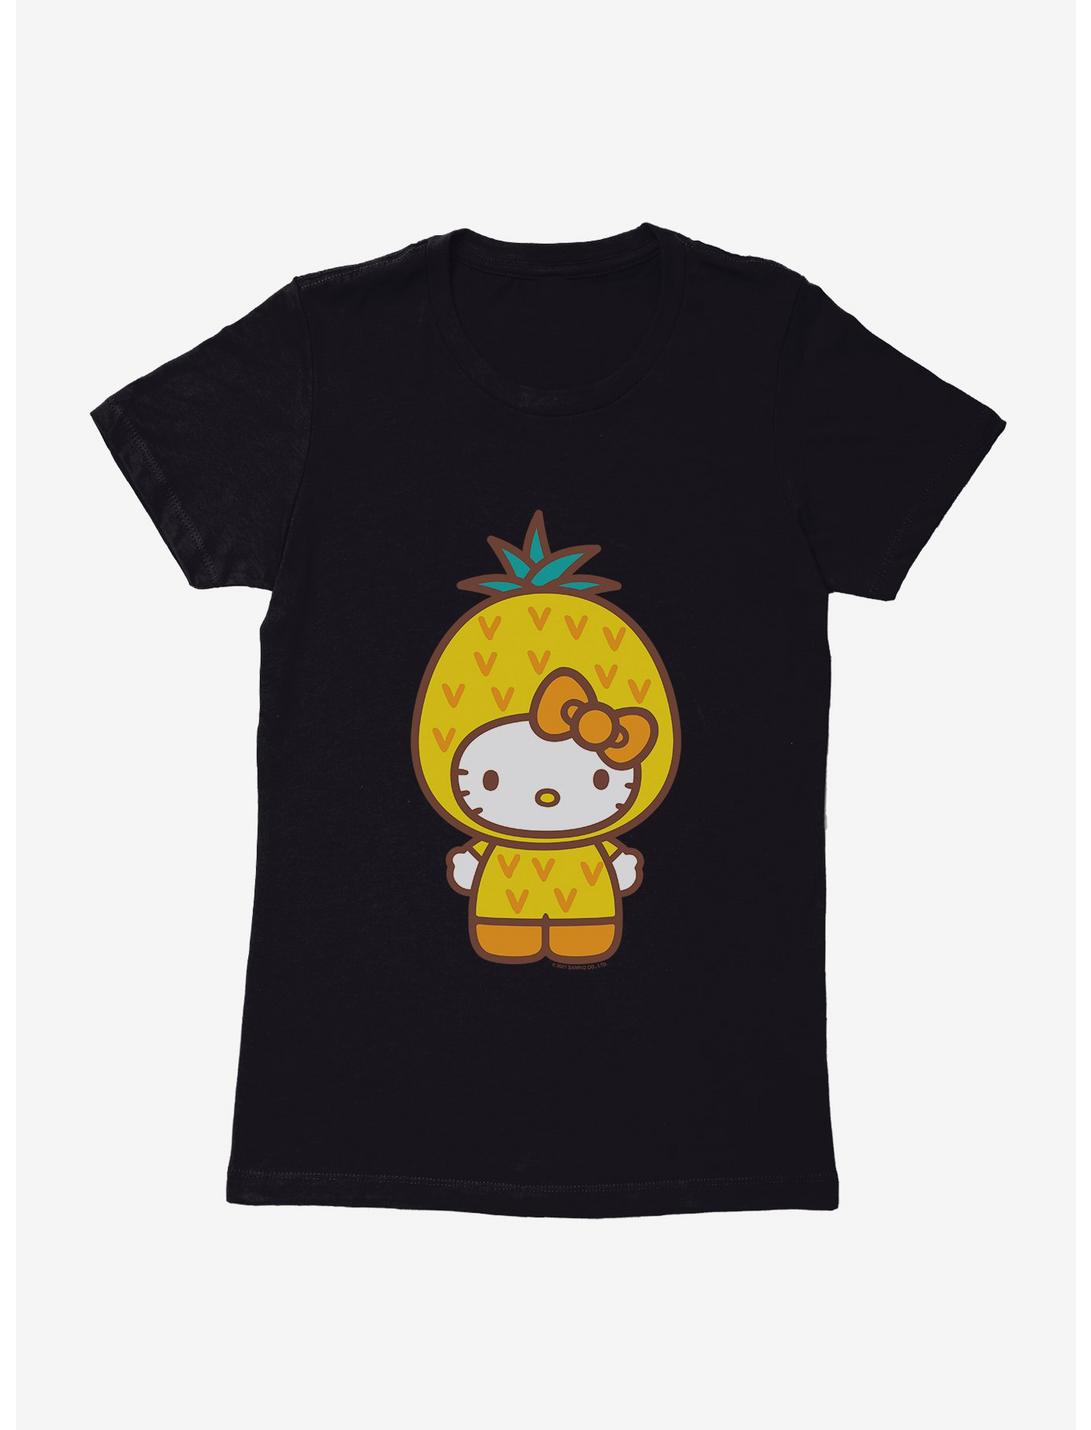 Hello Kitty Five A Day Wise Pineapple Womens T-Shirt, , hi-res